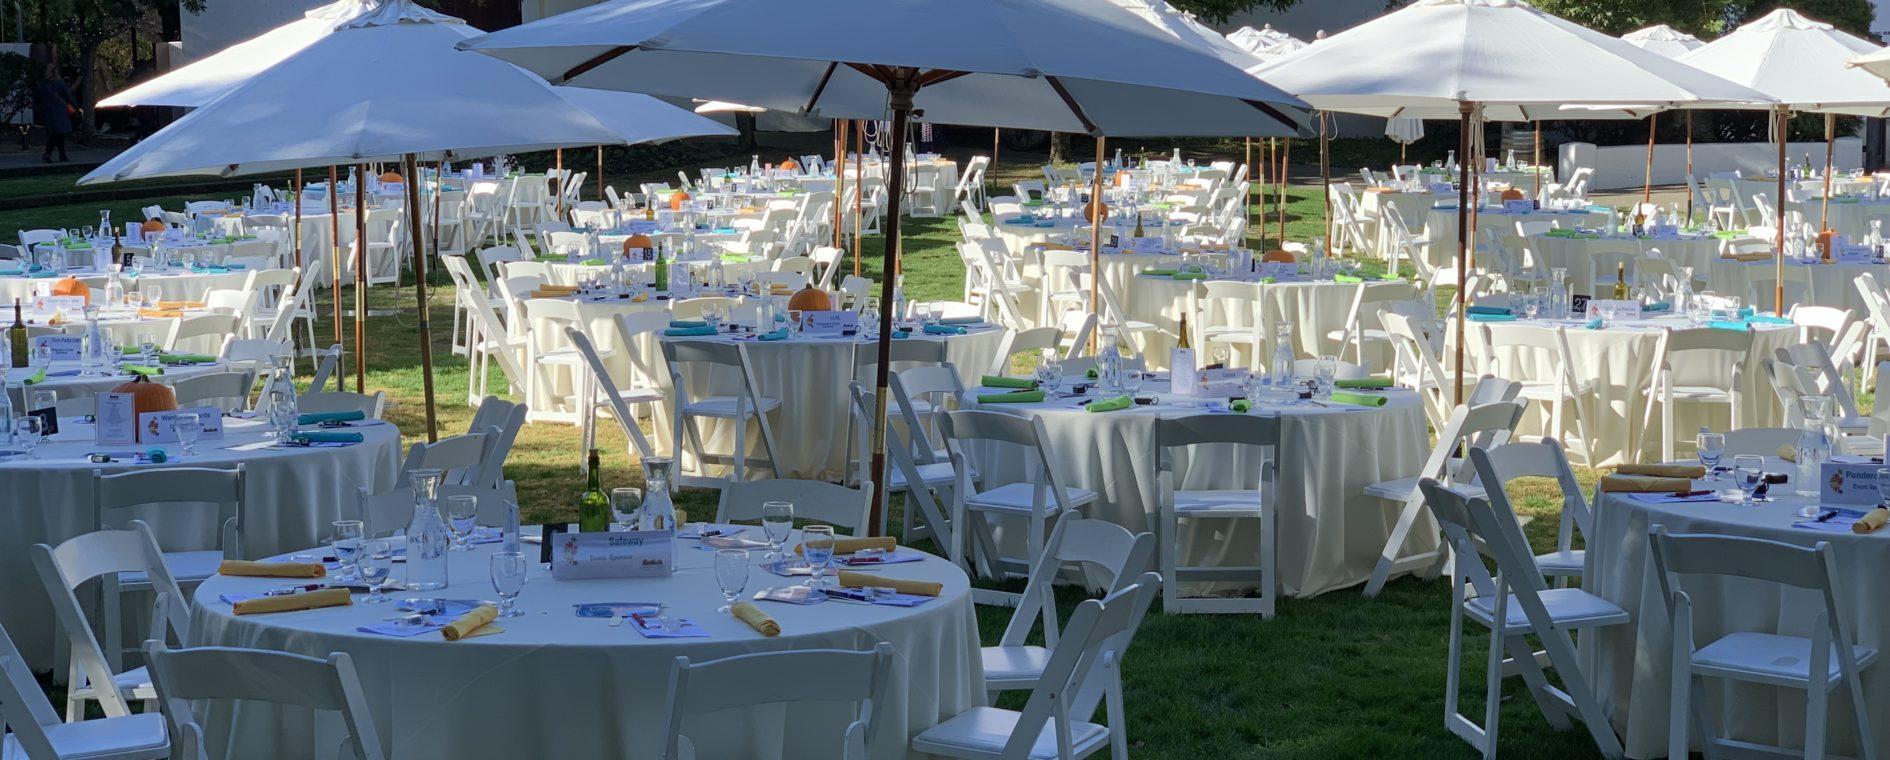 Corporate Catering Experiences | Livermore, CA | On the Vine Catering